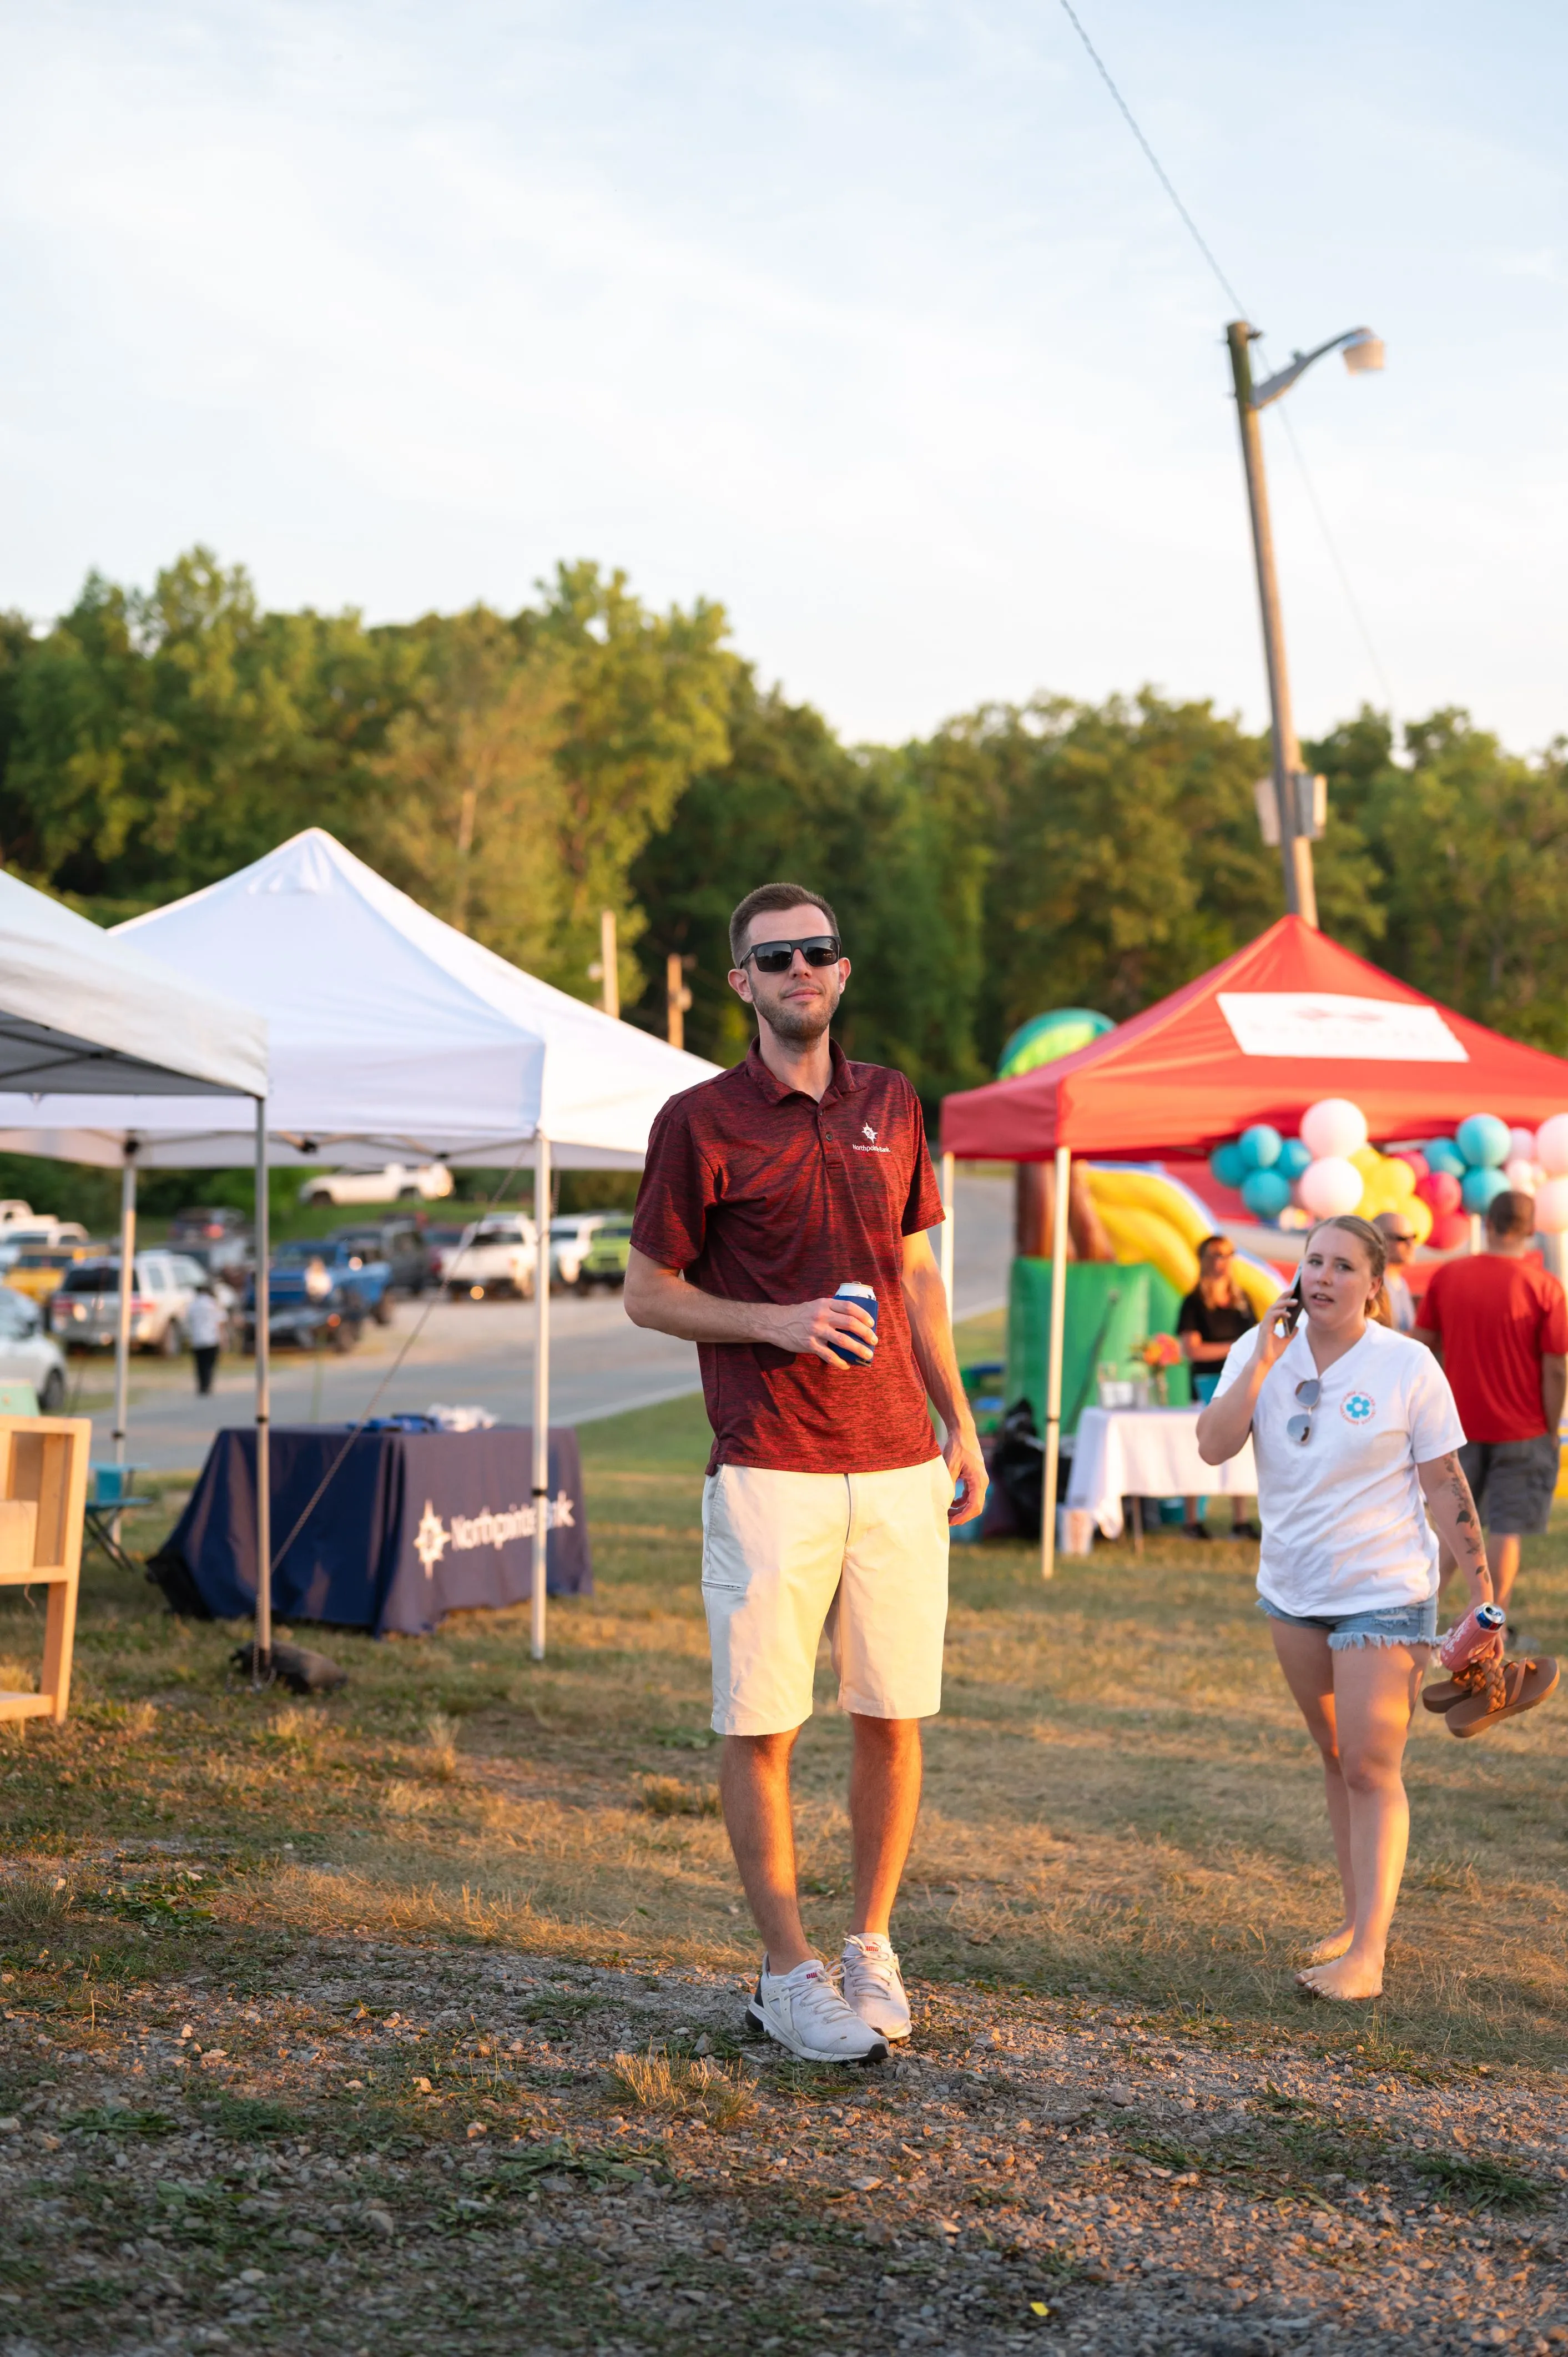 Man in sunglasses and a hat walking at an outdoor event with tents and people in the background.